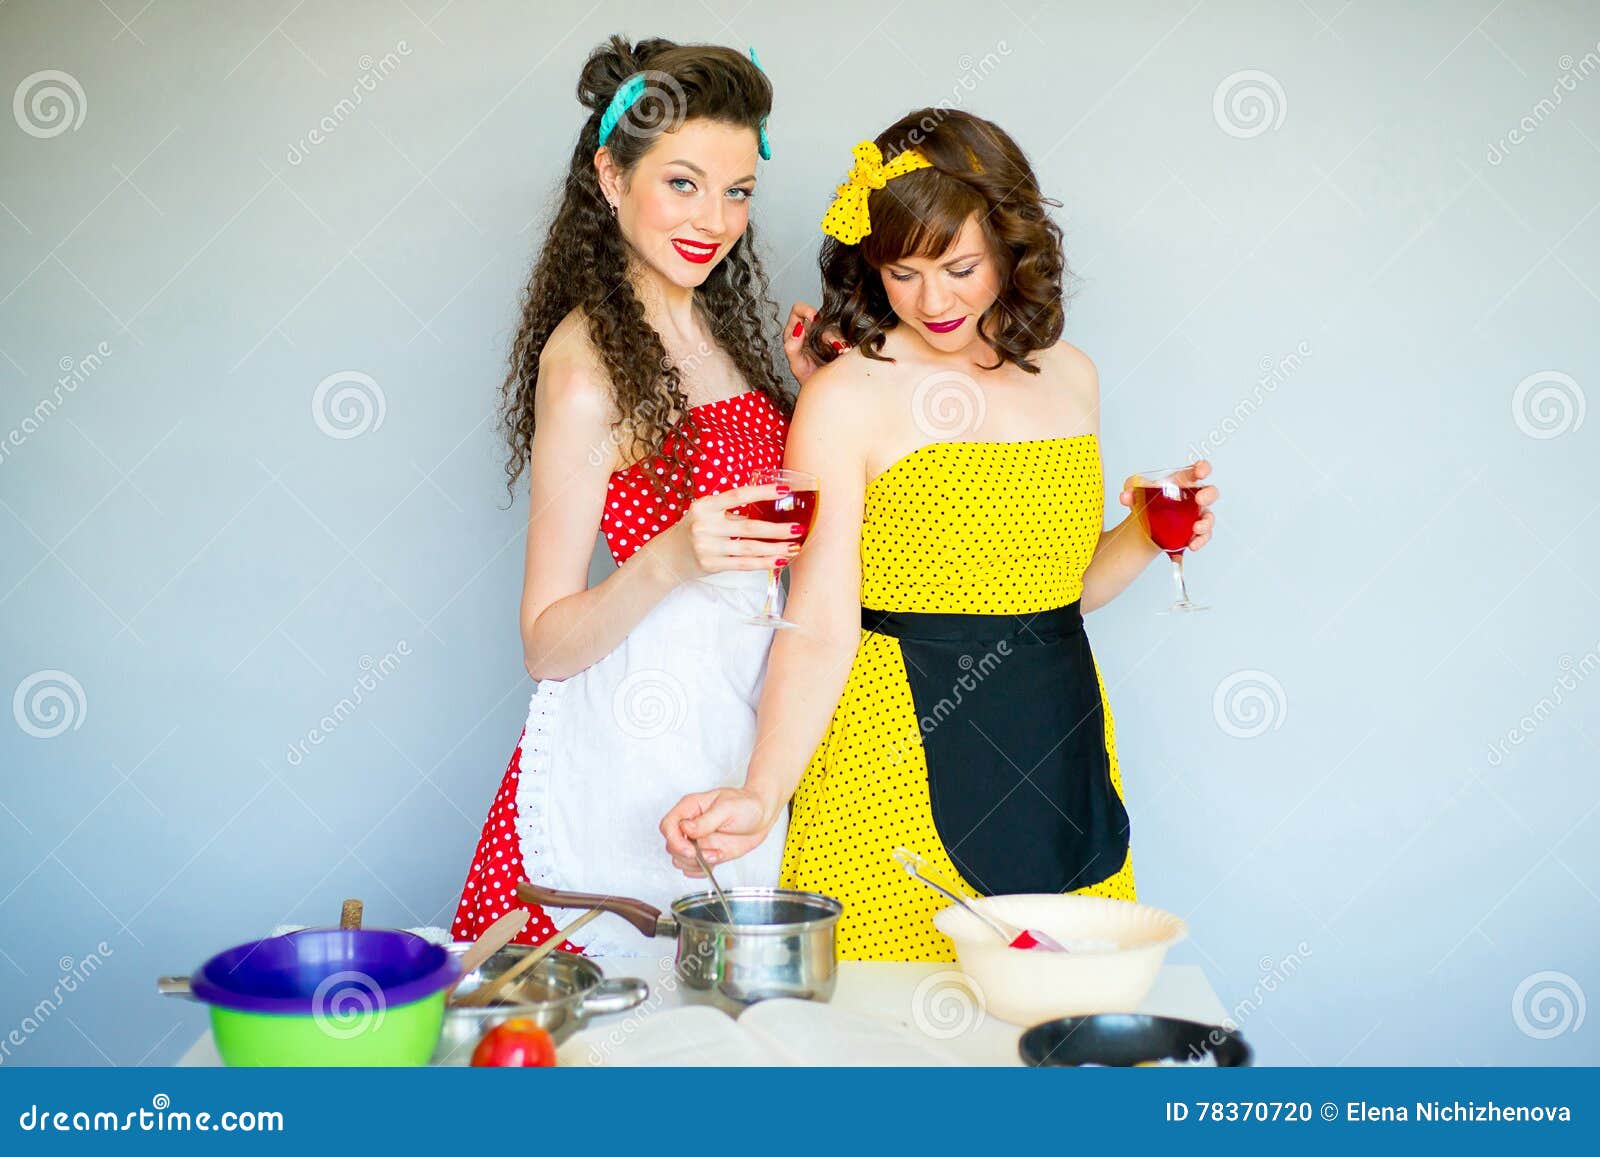 two housewifes change their